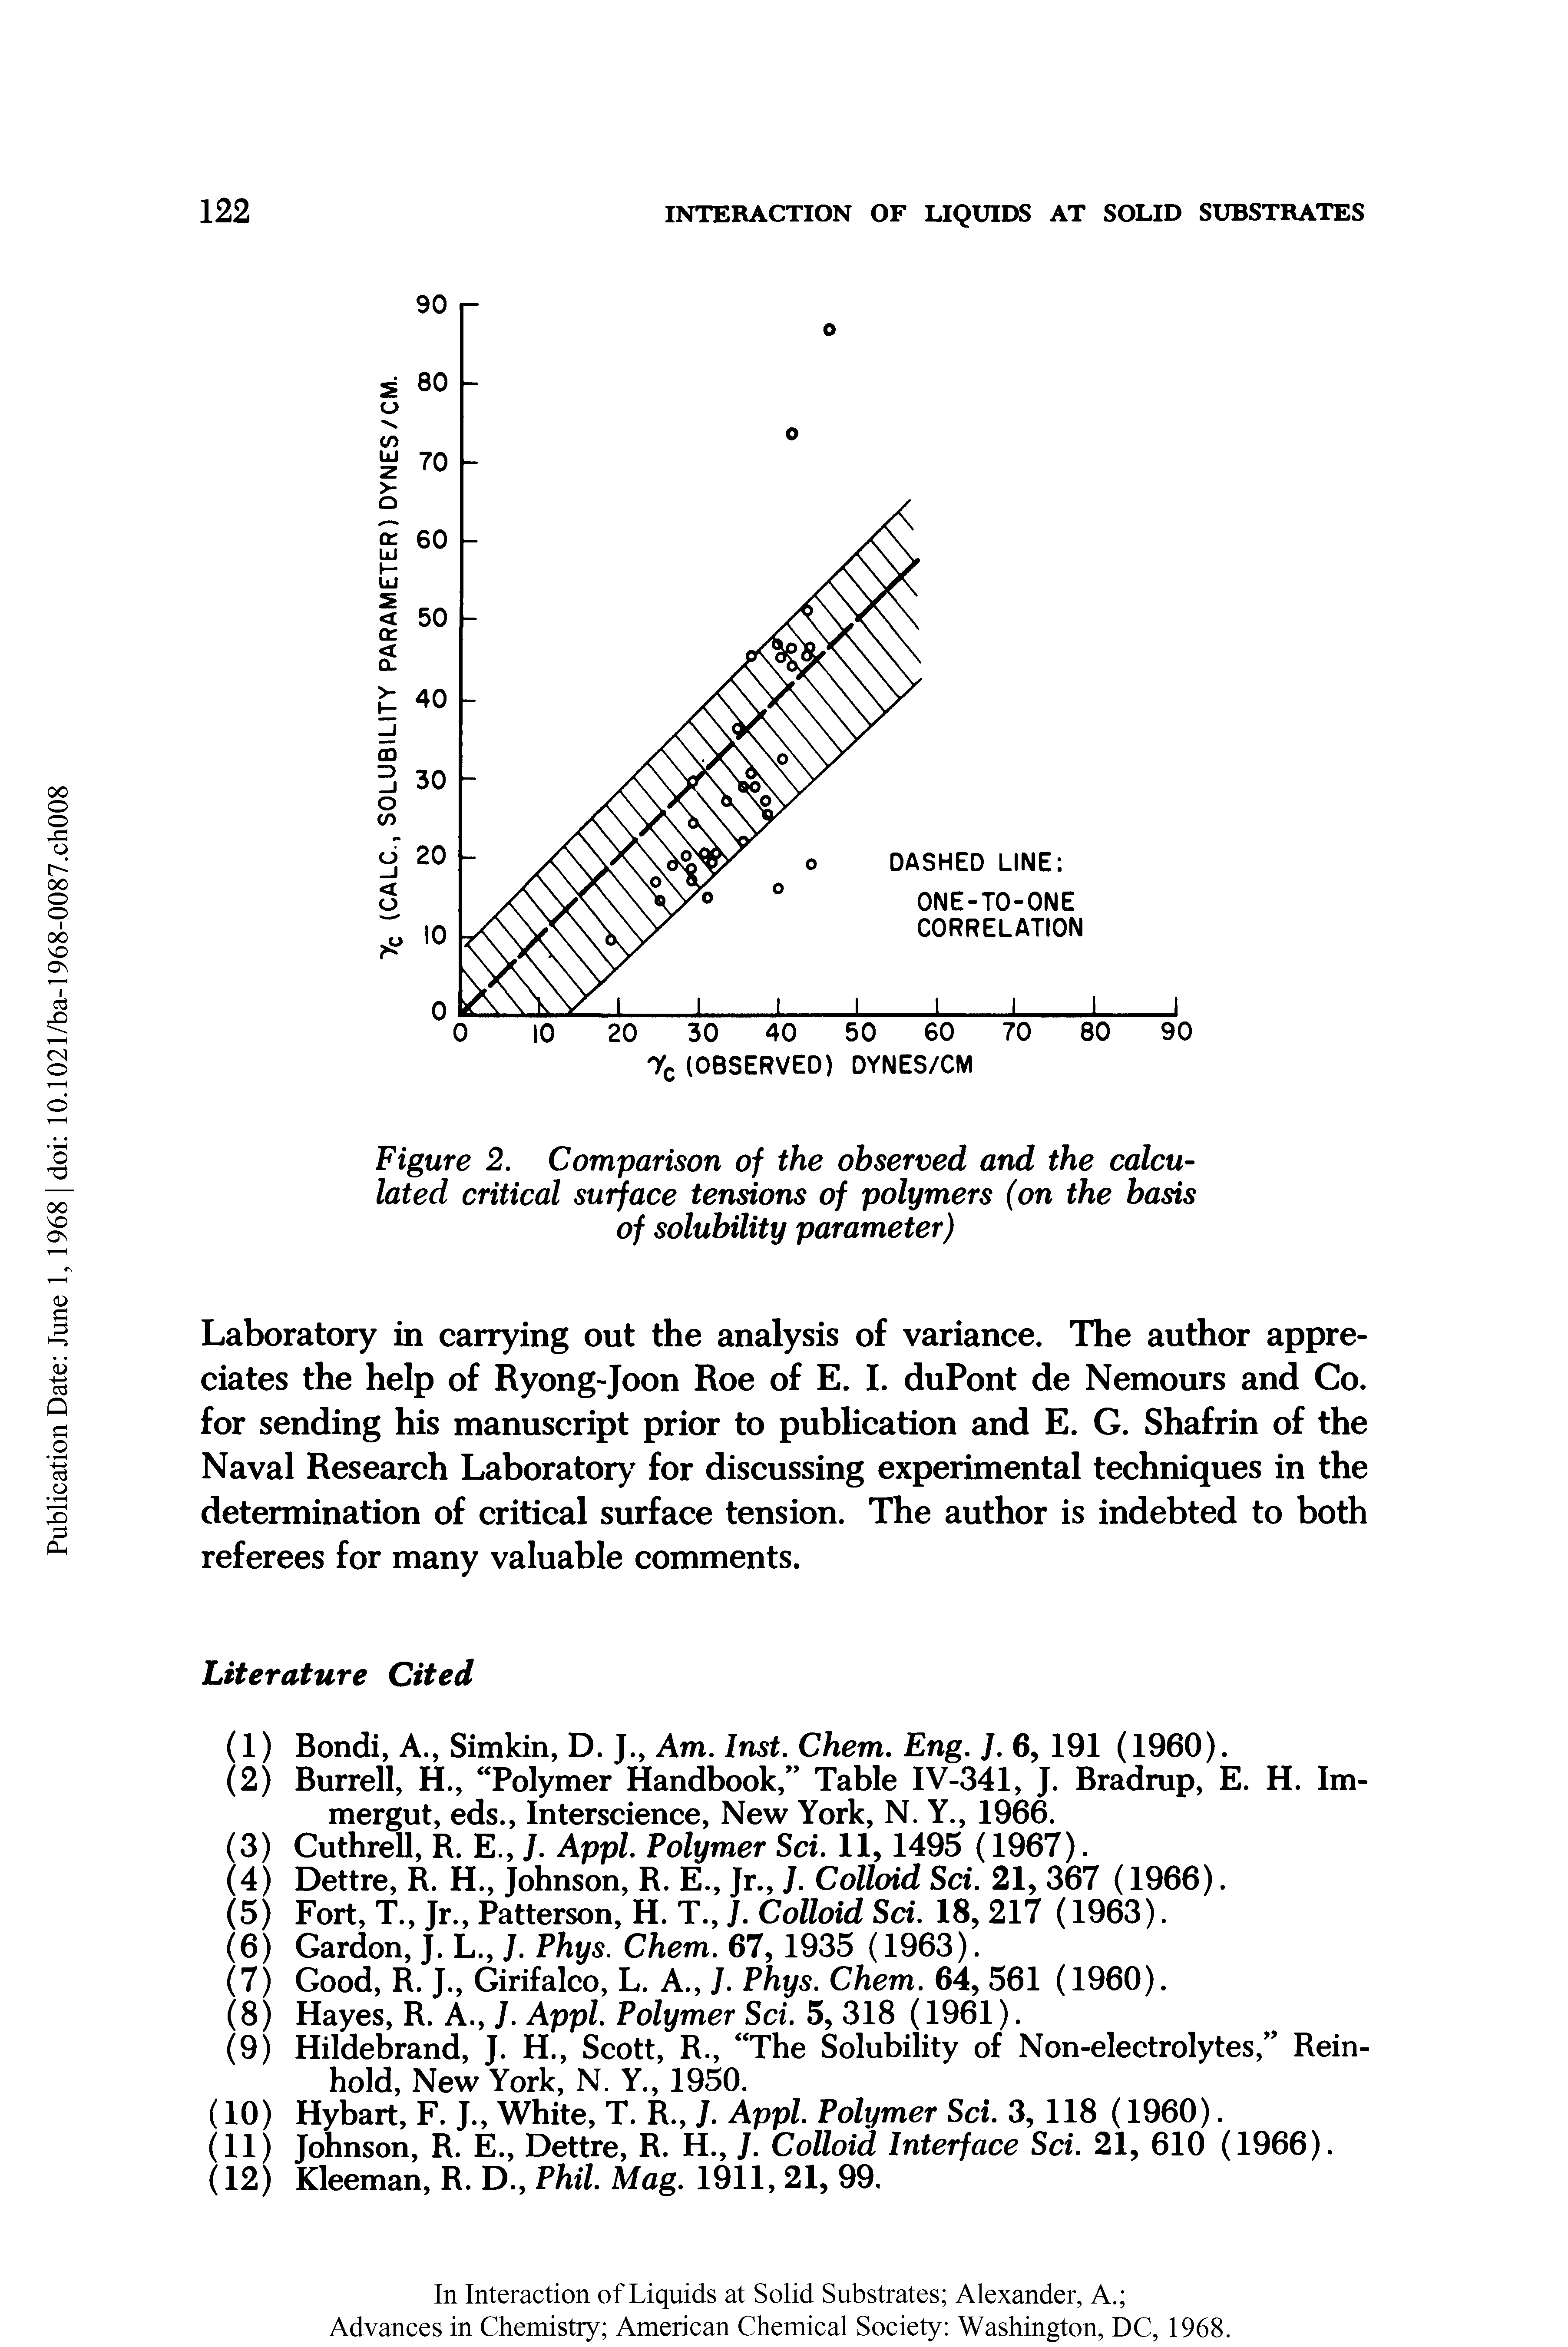 Figure 2. Comparison of the observed and the calculated critical surface tensions of polymers (on the basis of solubility parameter)...